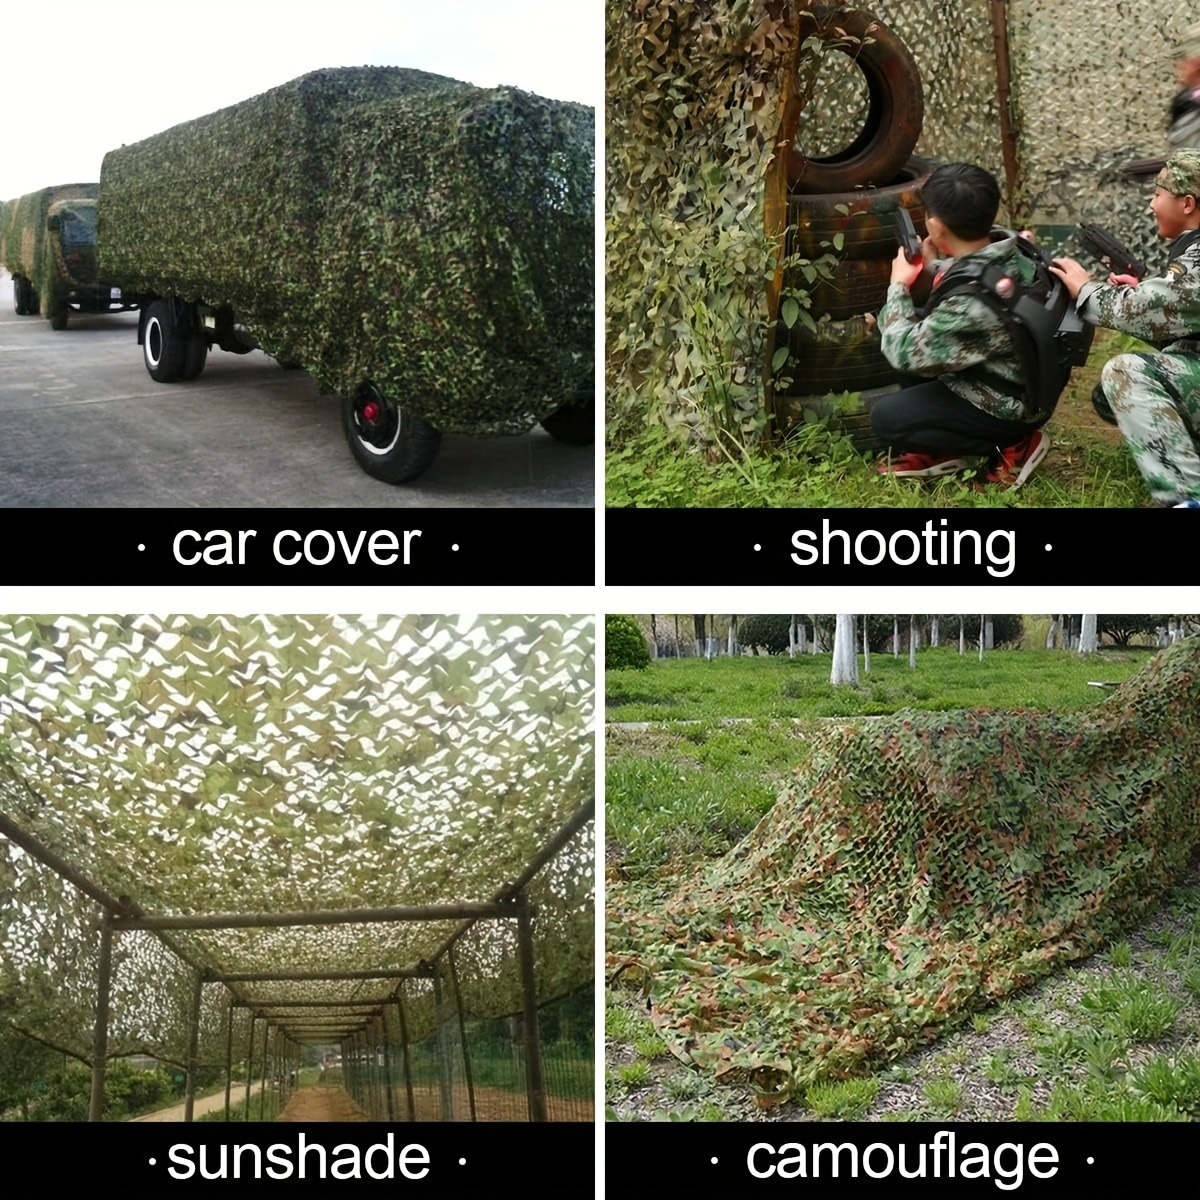 Camouflage Camo Net Hunting Hide Ghillie Army Military Dry Grass Hay 3D  Blind